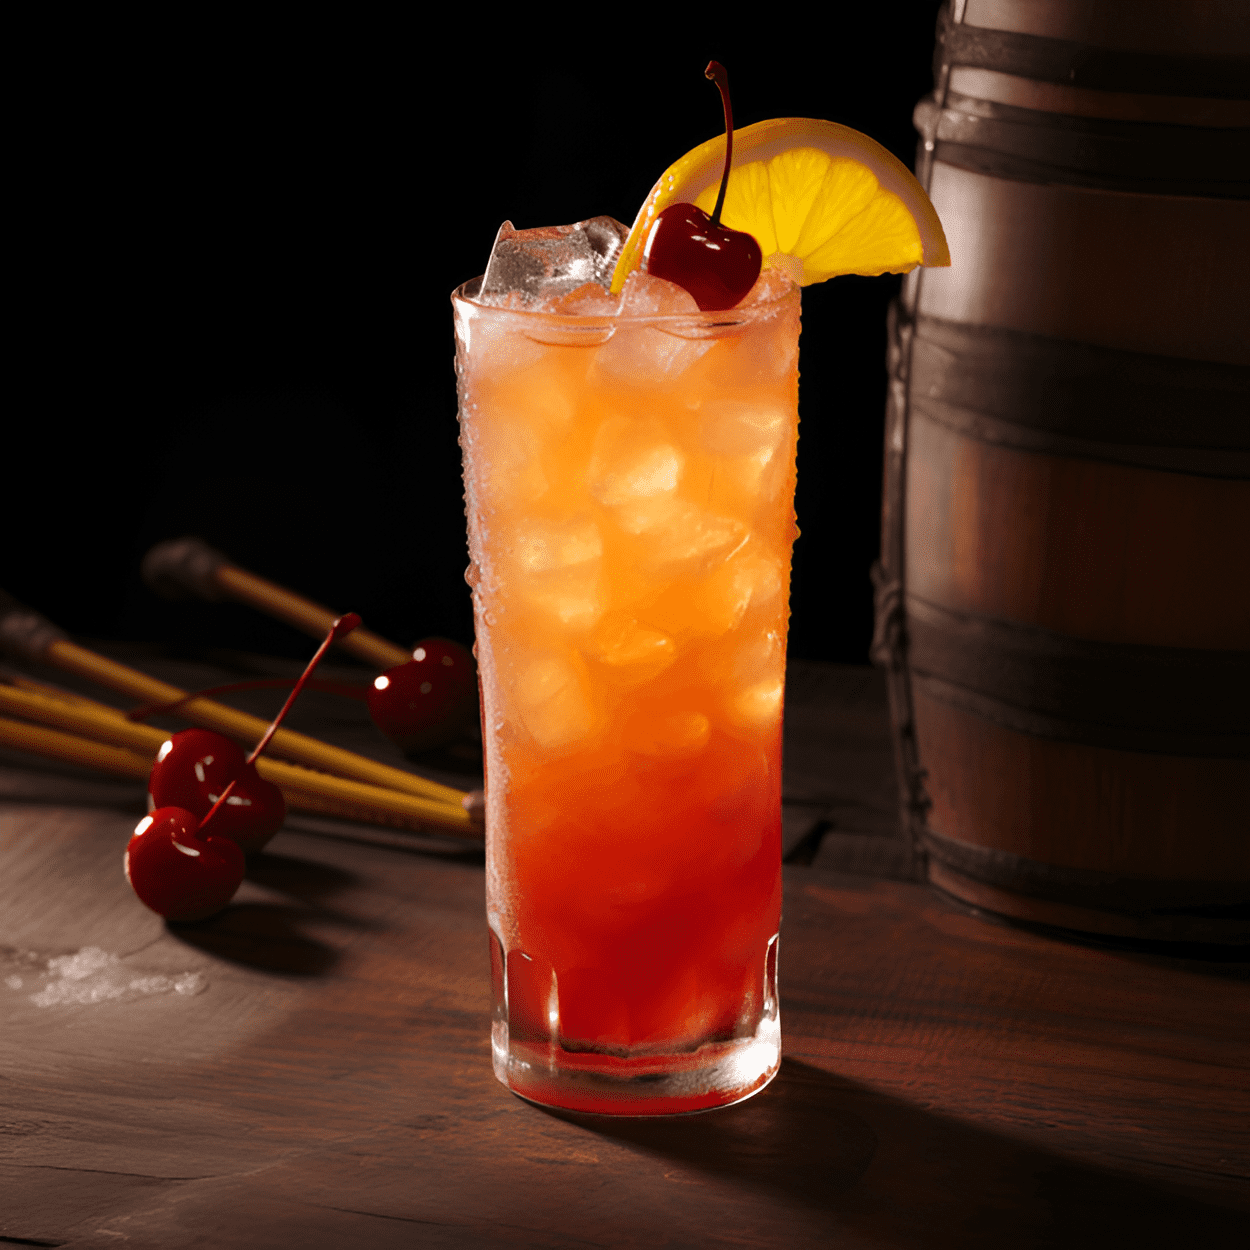 Pirates Punch Cocktail Recipe - The Pirates Punch is a robust, fruity cocktail with a strong kick. It's sweet, yet balanced with a hint of sourness. The rum gives it a strong, warming sensation, while the fruit juices add a refreshing, tropical twist.